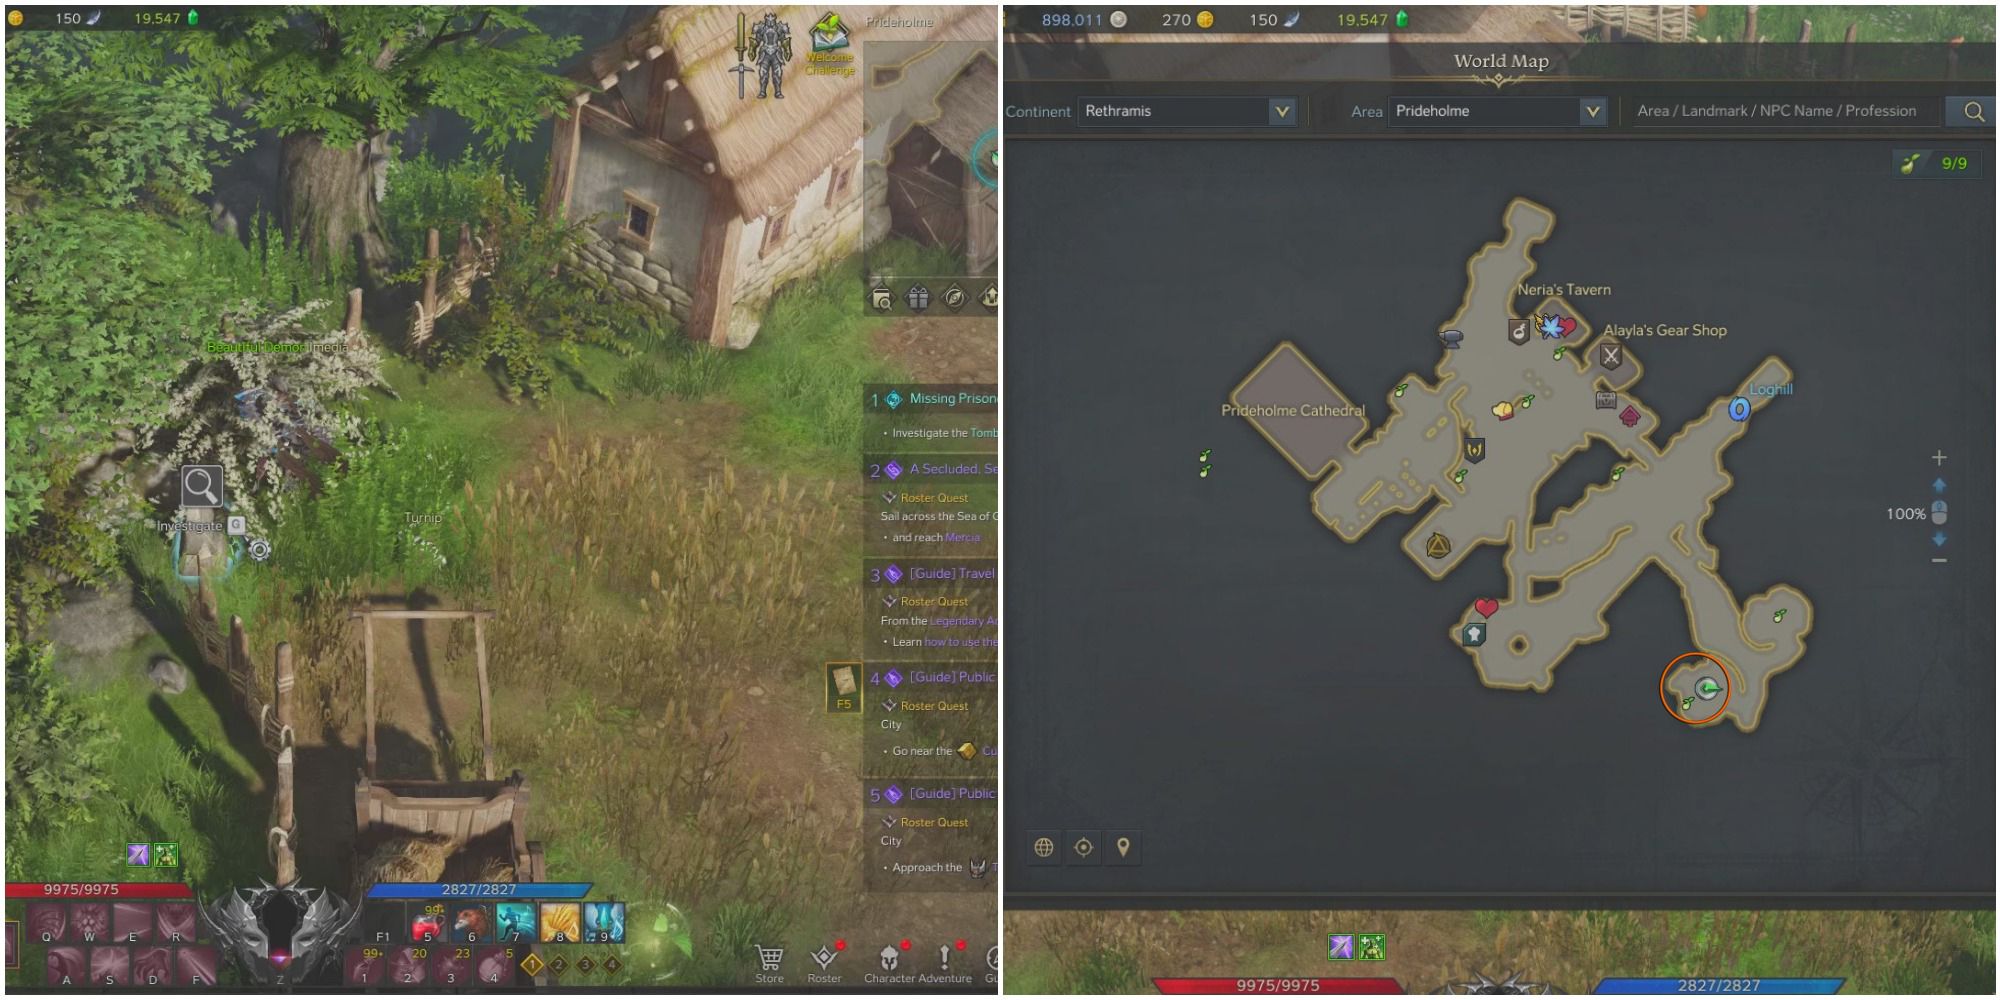 A split image of a shadowhunter searching a grave by a farm and a map of Prideholme